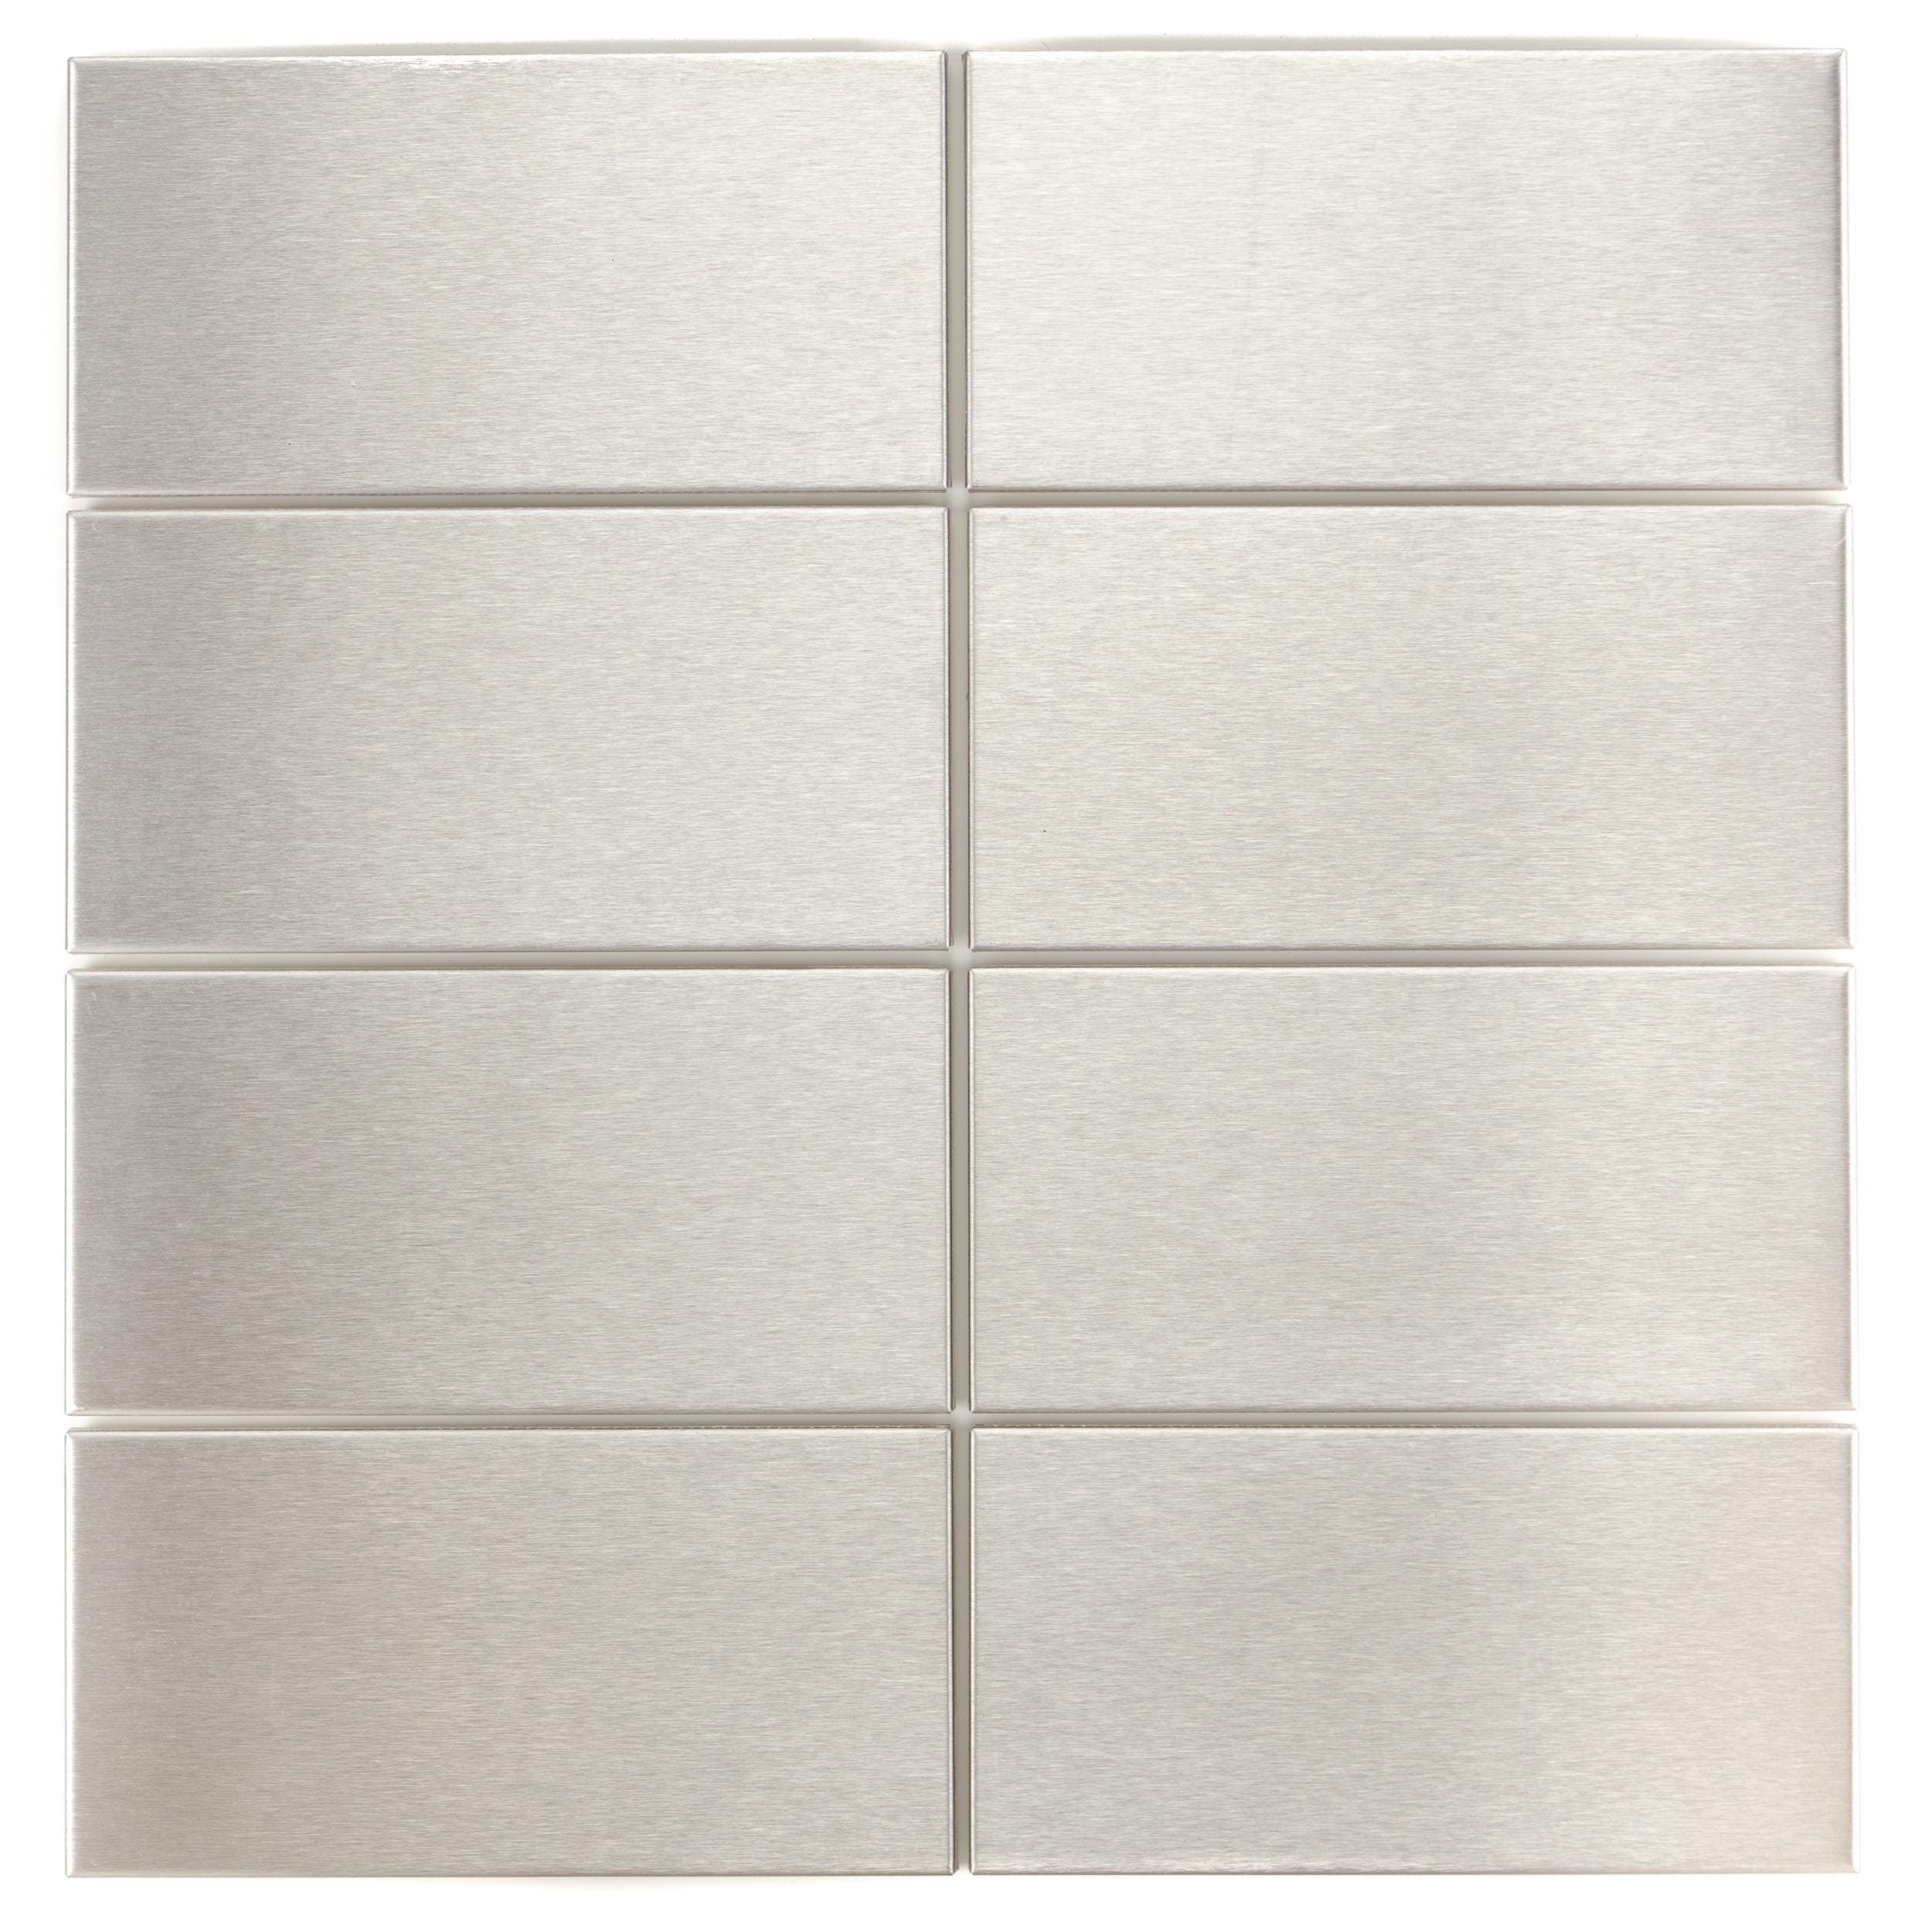 Brushed Silver 3x6 inch Metal Wall Tiles K 446 (Case of 88 